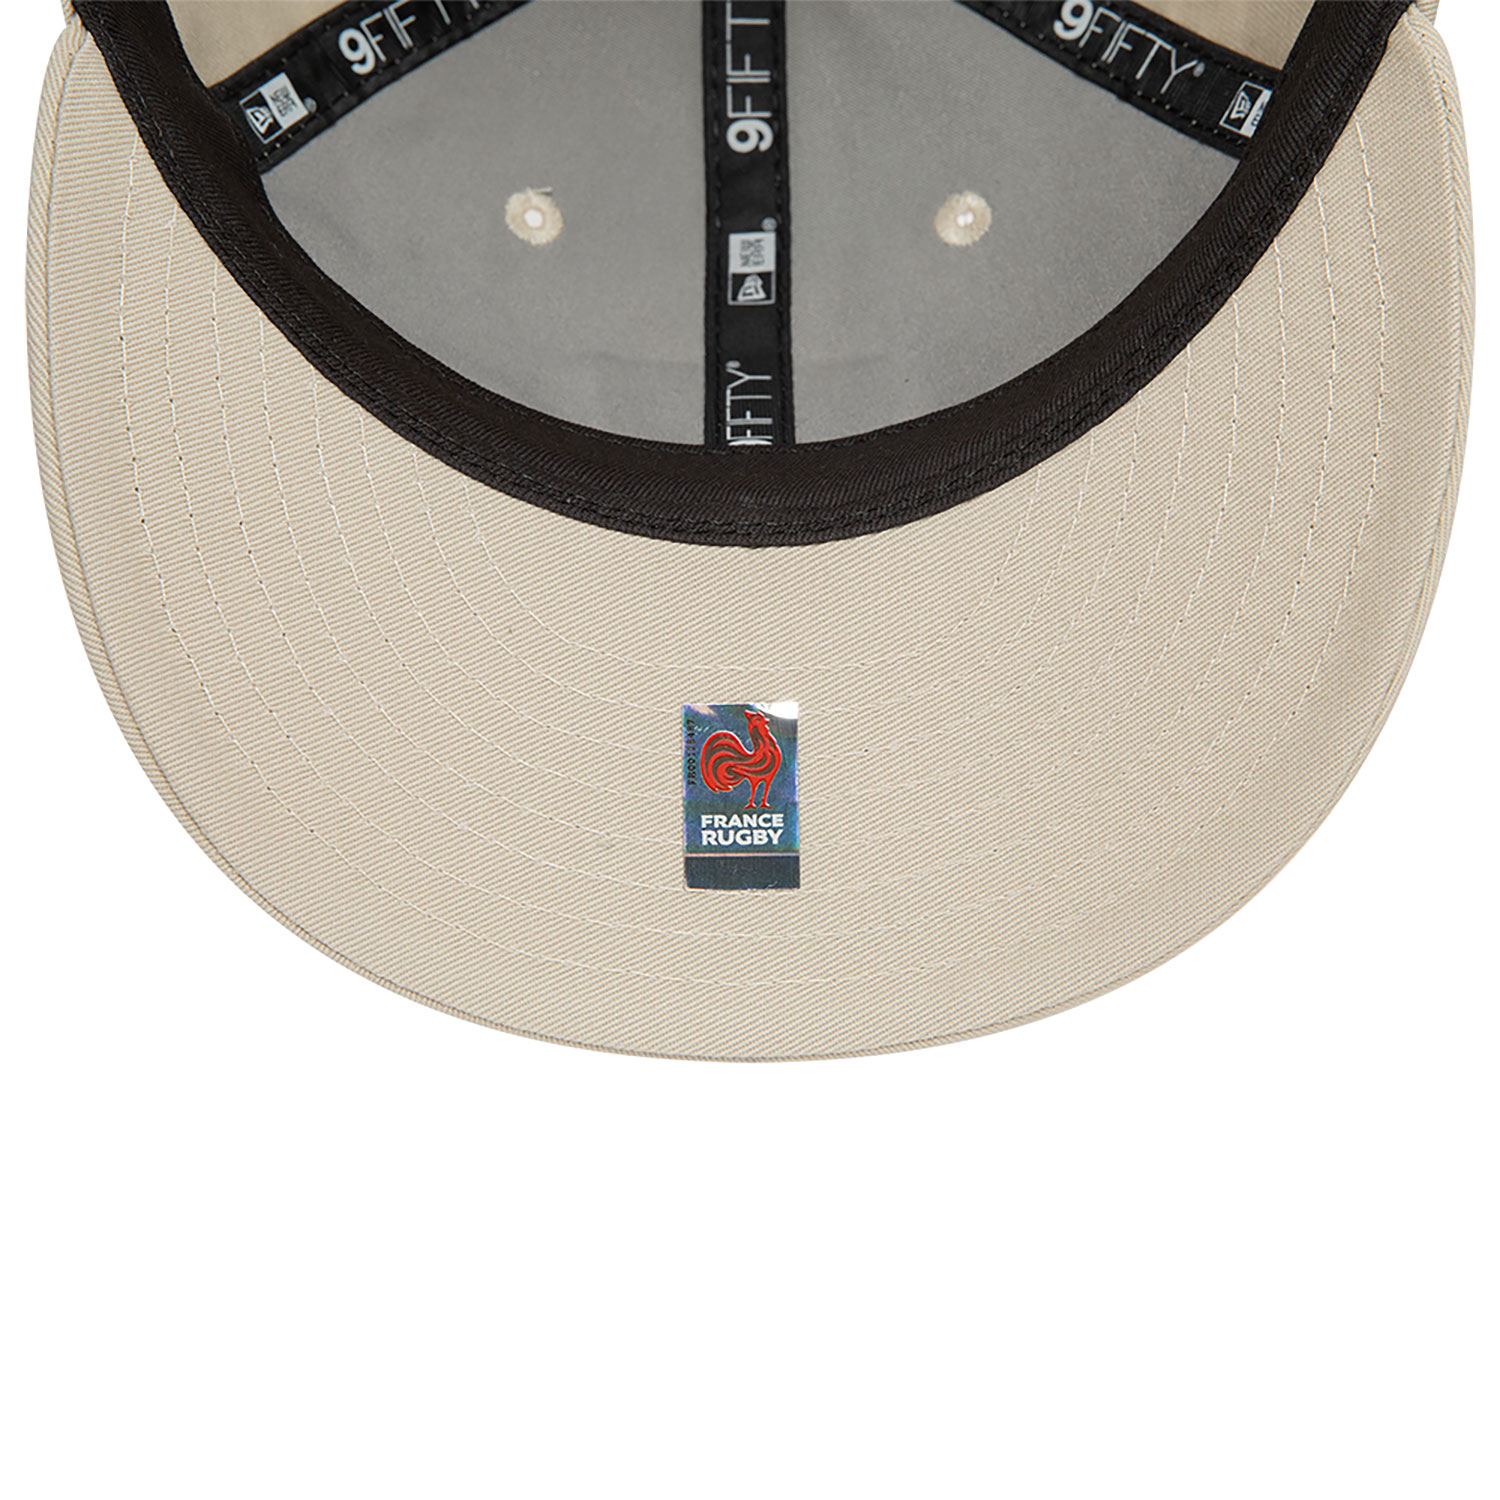 French Federation Of Rugby Stone 9FIFTY Snapback Cap